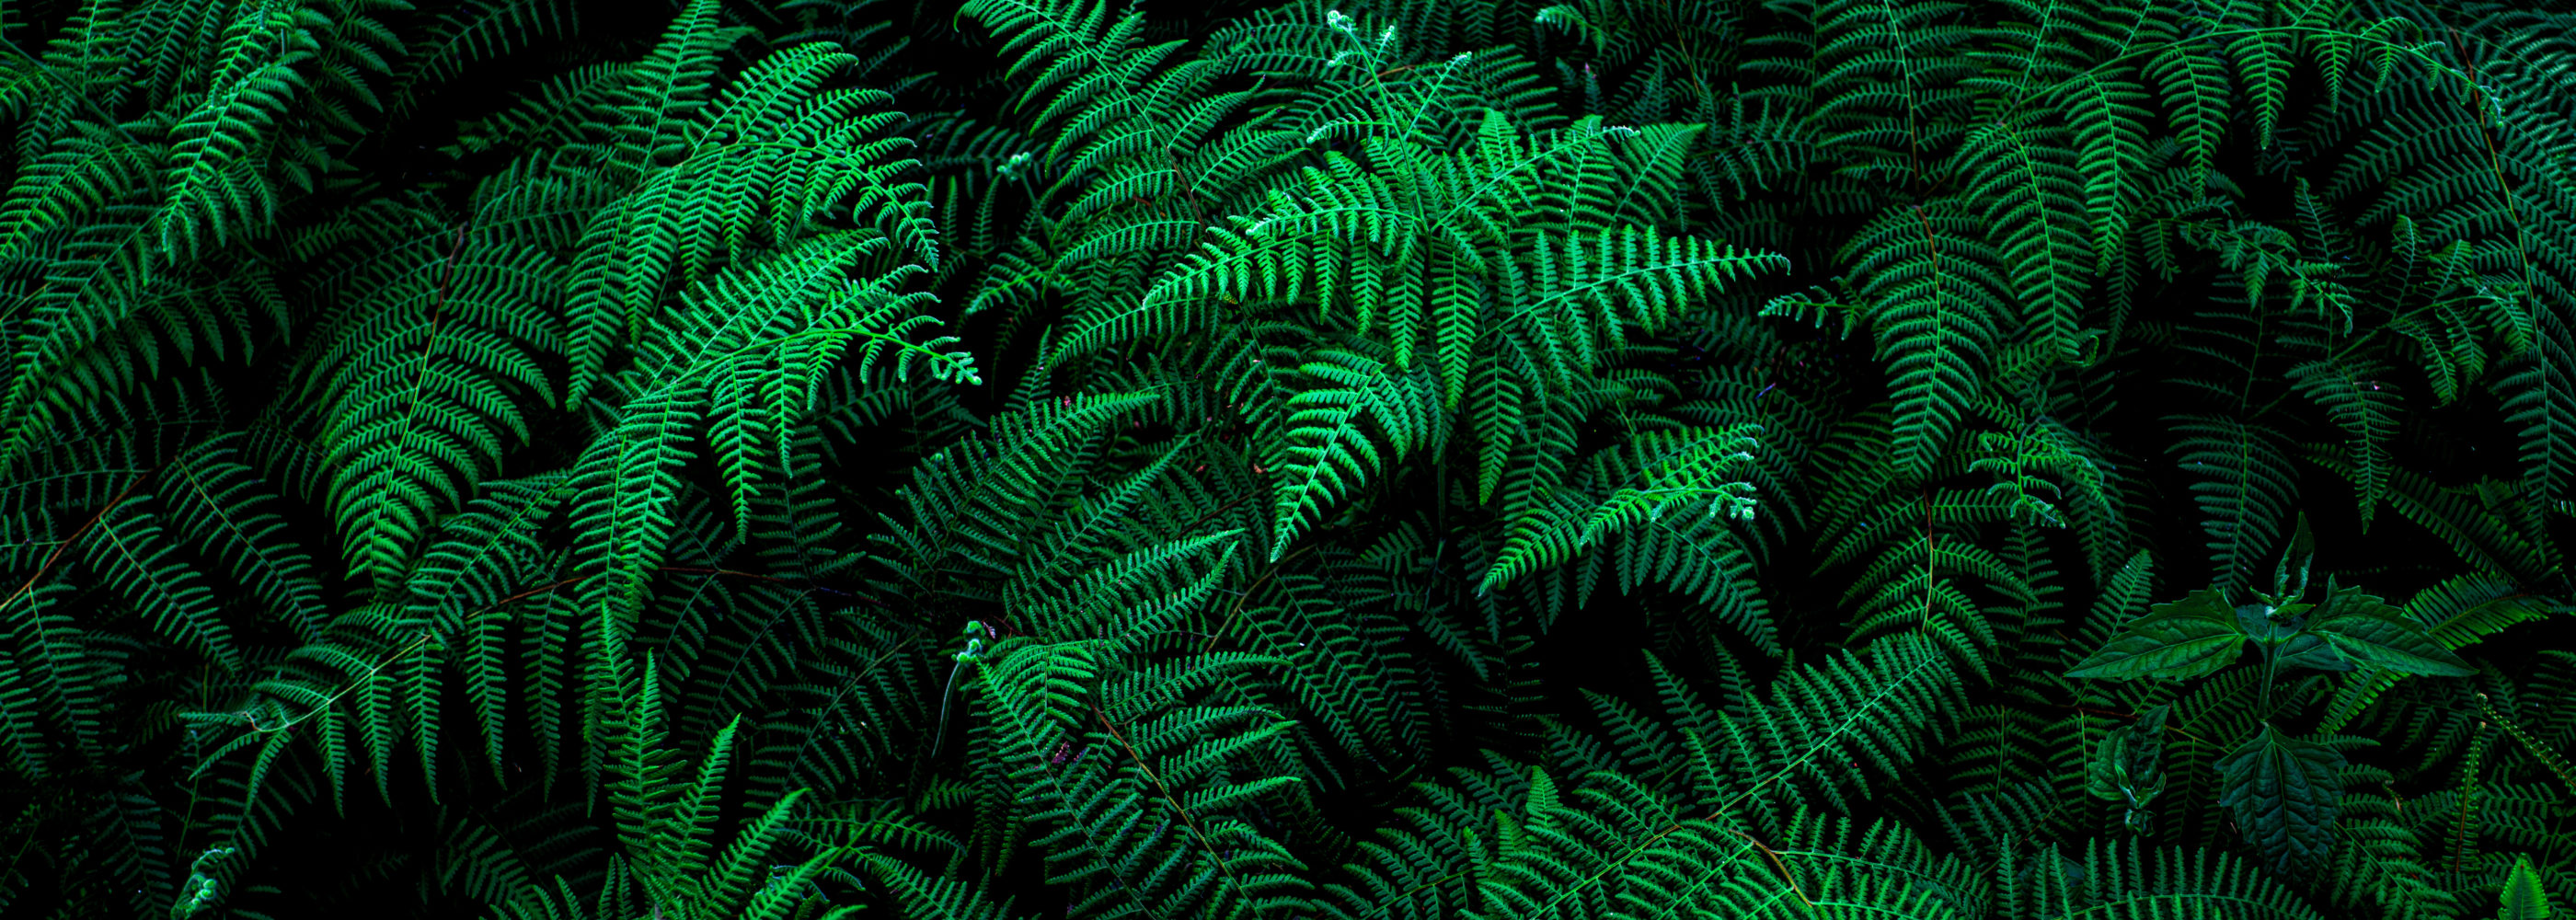 abstract green fern leaf fractal texture, nature background, tropical leaf